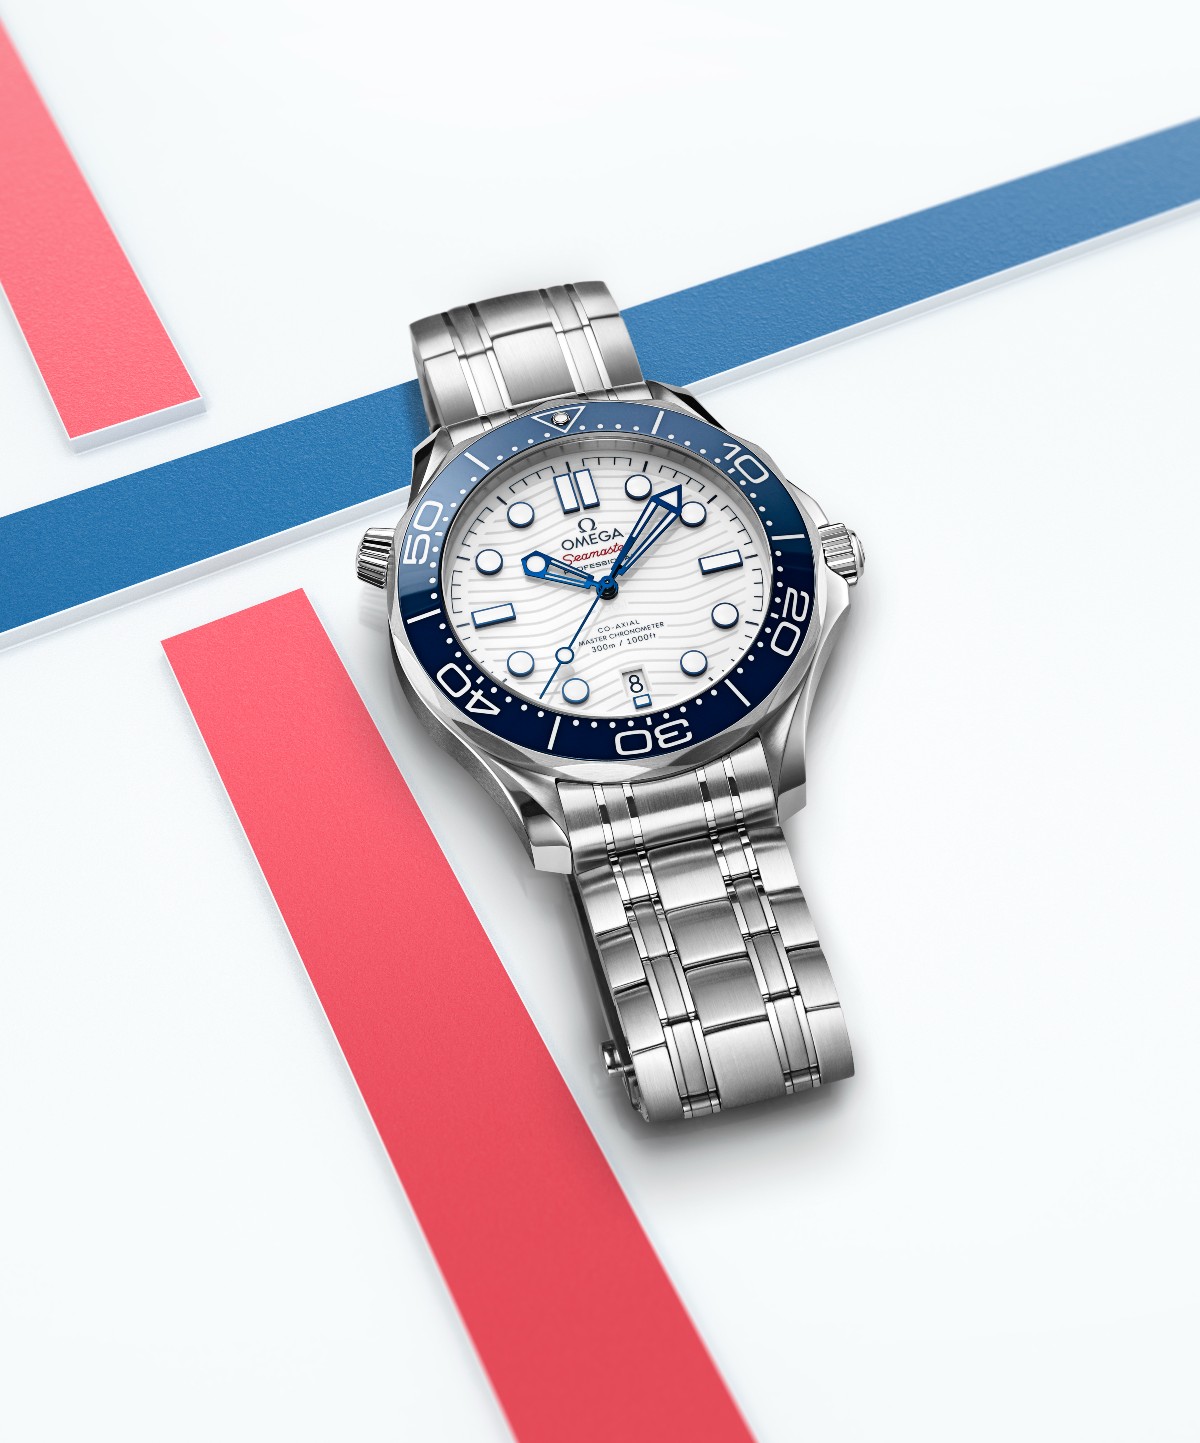 Omega Celebrates The Olympics With The Seamaster Diver 300M Tokyo 2020